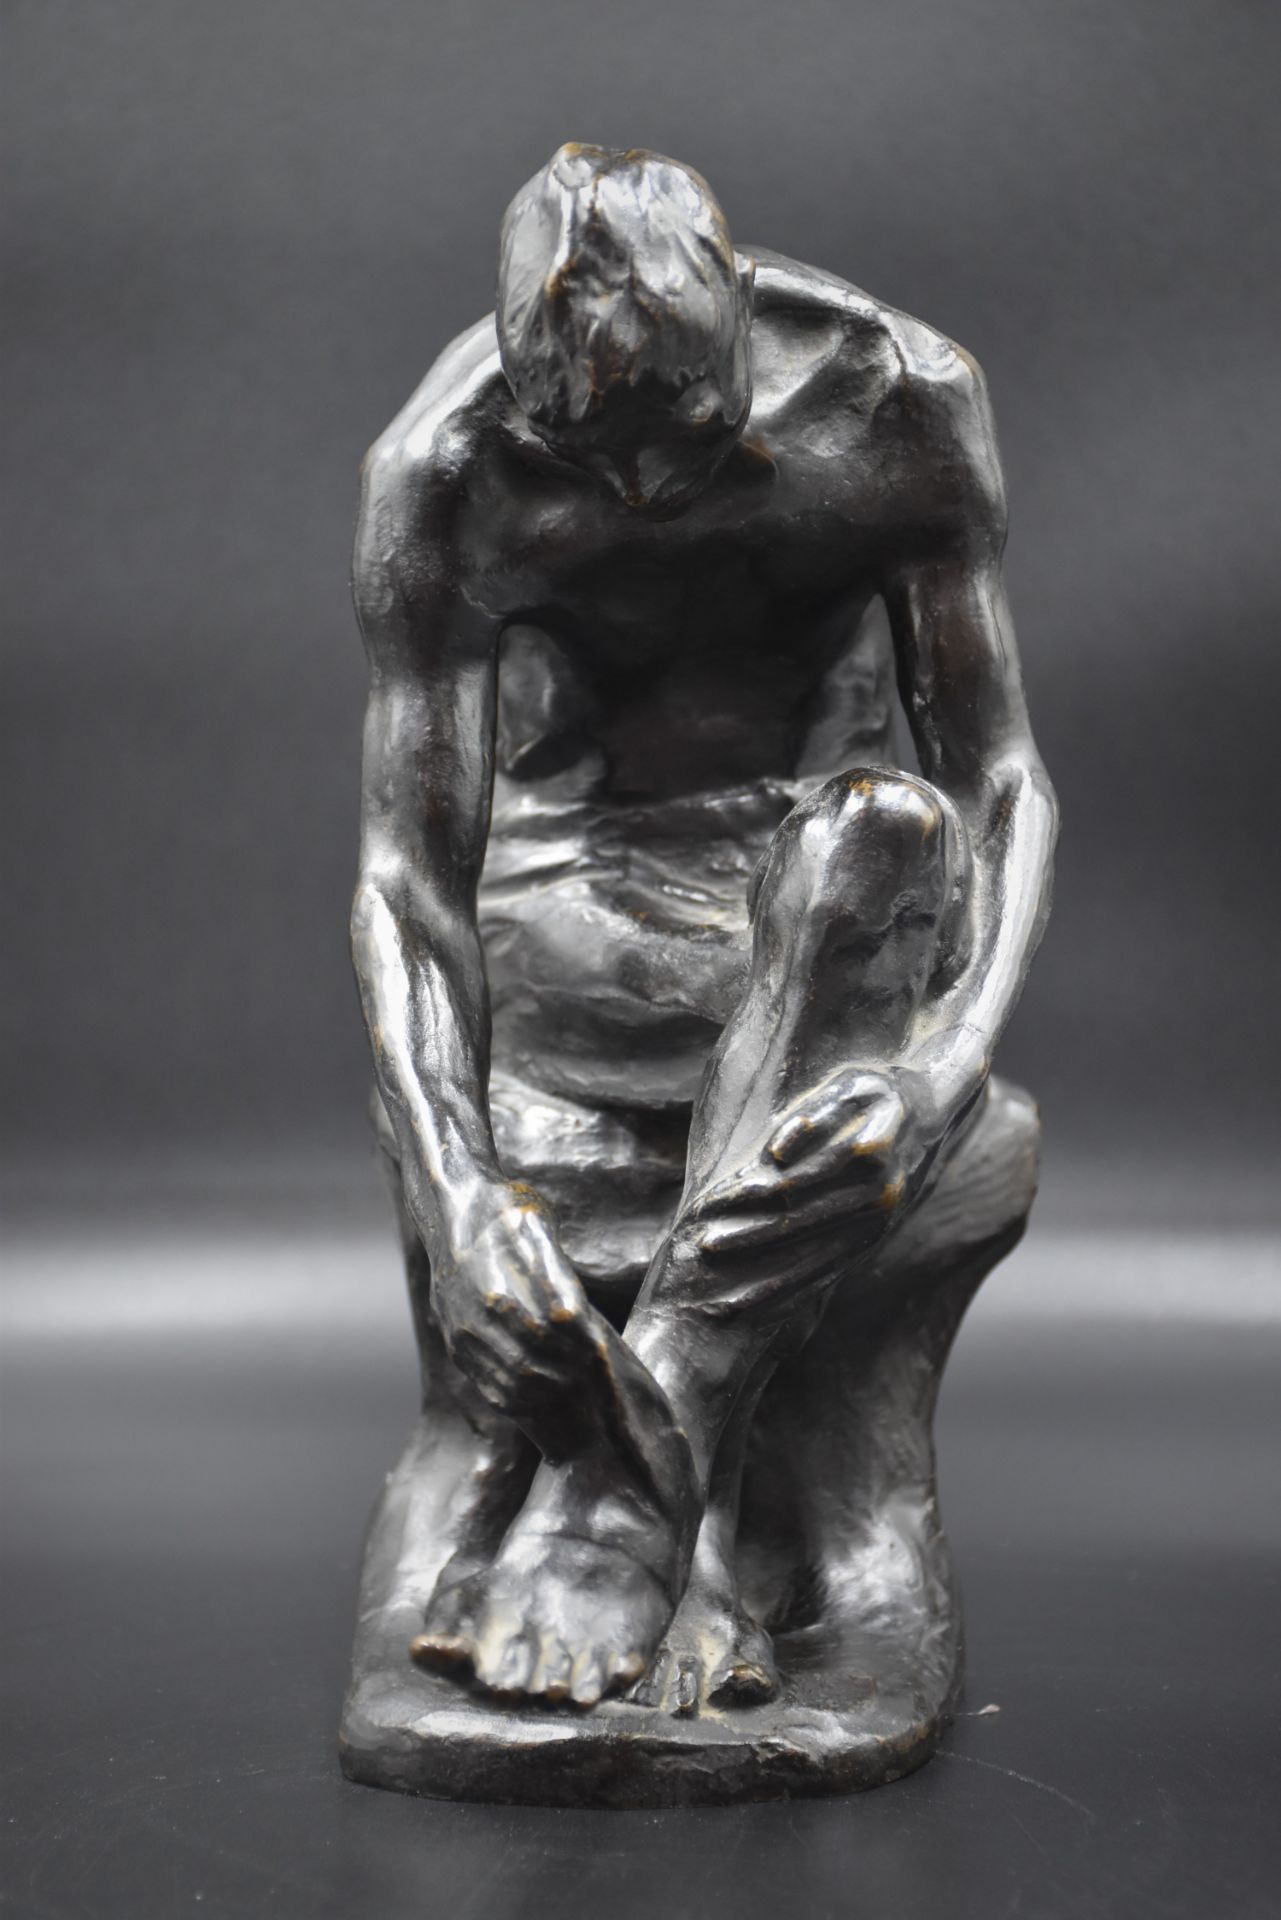 Constantin MEUNIER (1831-1905). The wounded man. Bronze with dark patina. Stamp of the founder Verbe